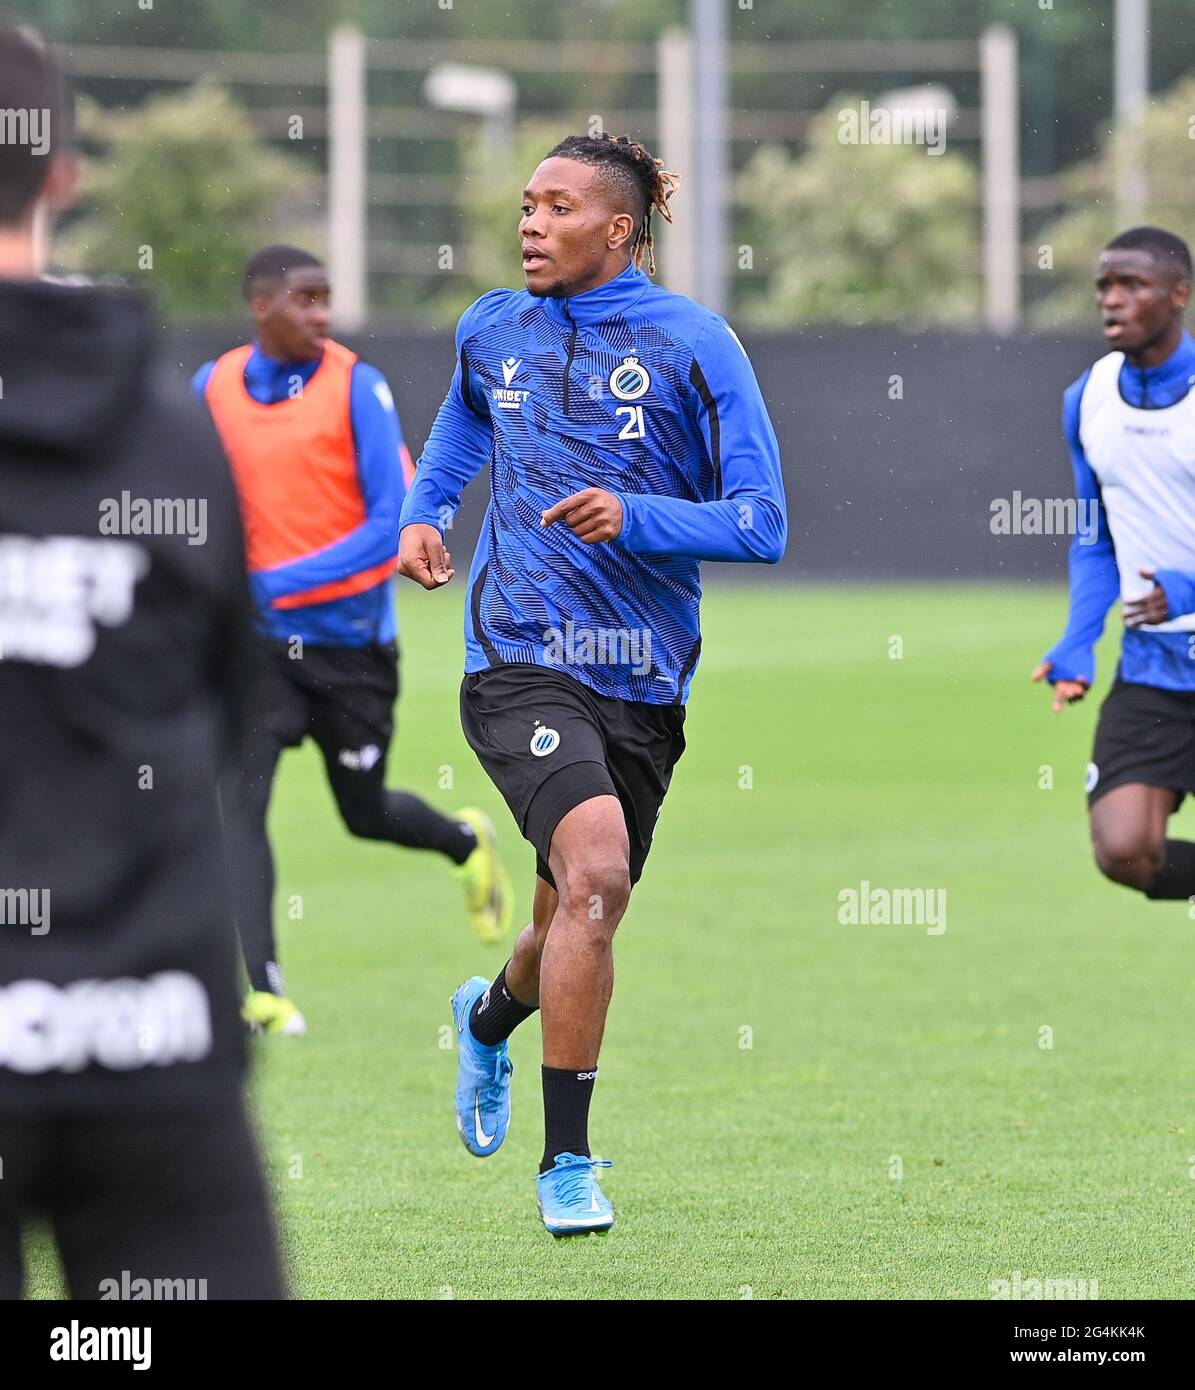 Club's David Okereke pictured during the first training session for the new  season 2021-2022 of Jupiler Pro League first division soccer team Club Bru  Stock Photo - Alamy